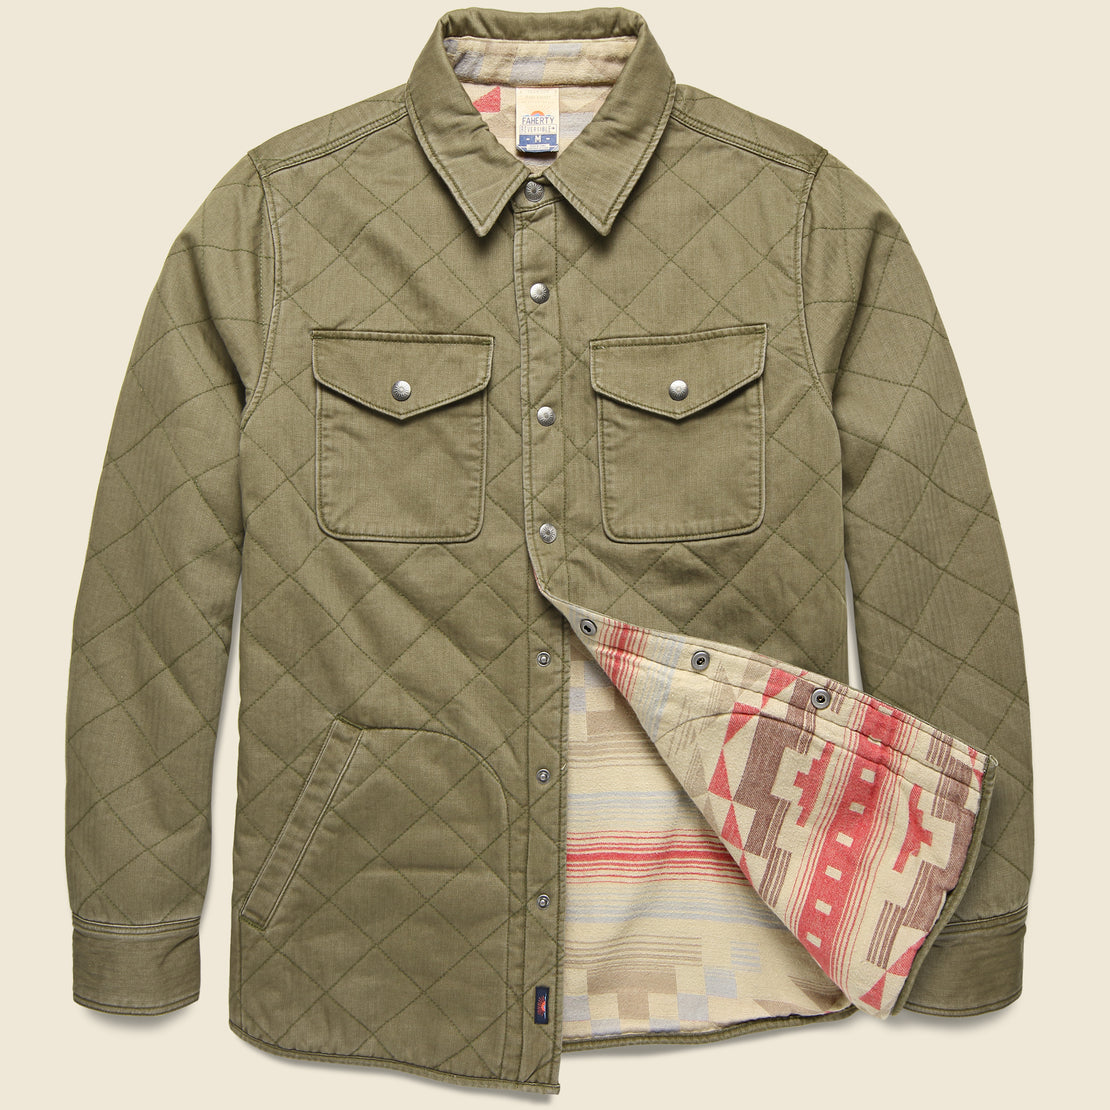 Yellowtail Reversible Bondi Jacket - Olive/Bighorn Sand - Faherty - STAG Provisions - Outerwear - Coat / Jacket